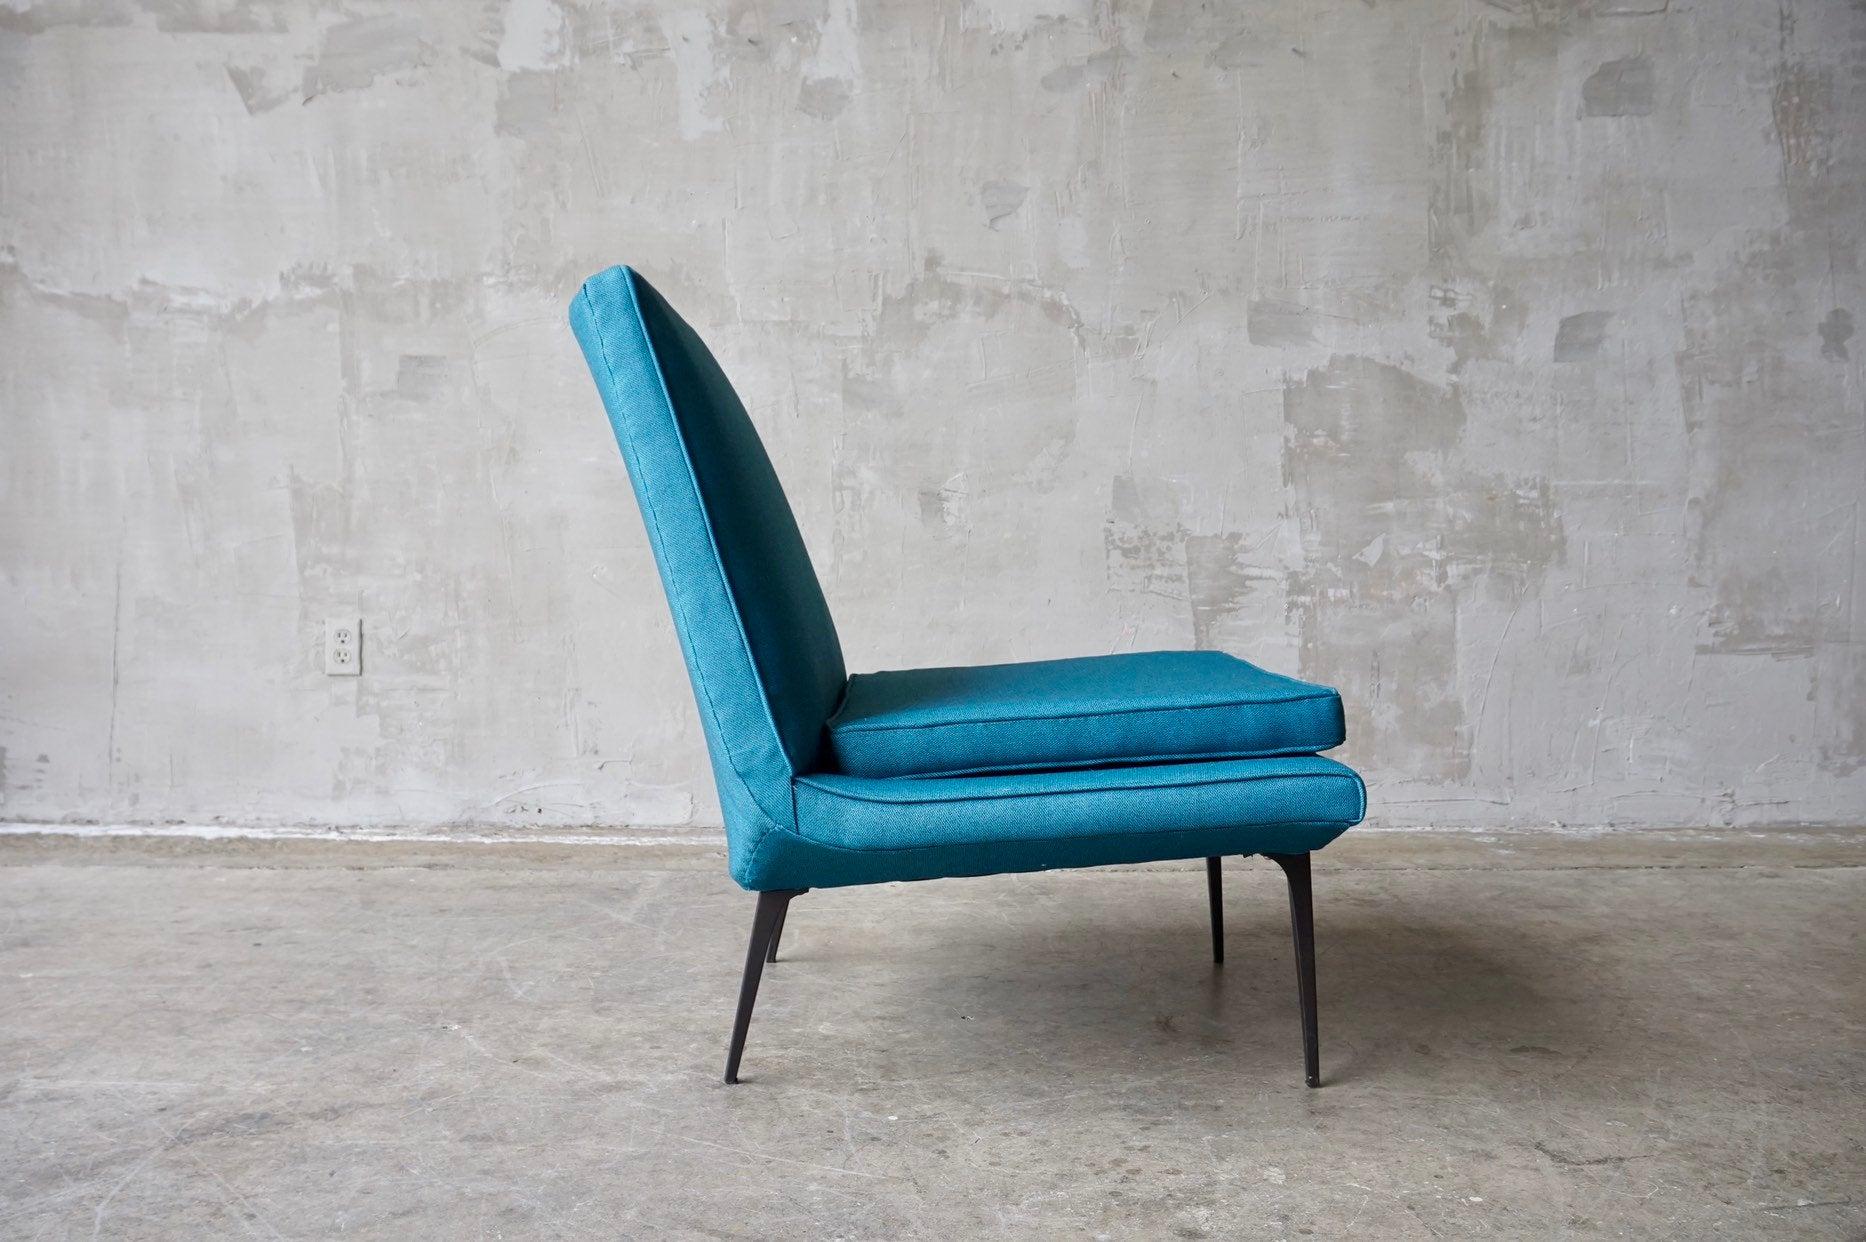 Upholstery Heywood Wakefield 'Metronome' Chair in Blue For Sale